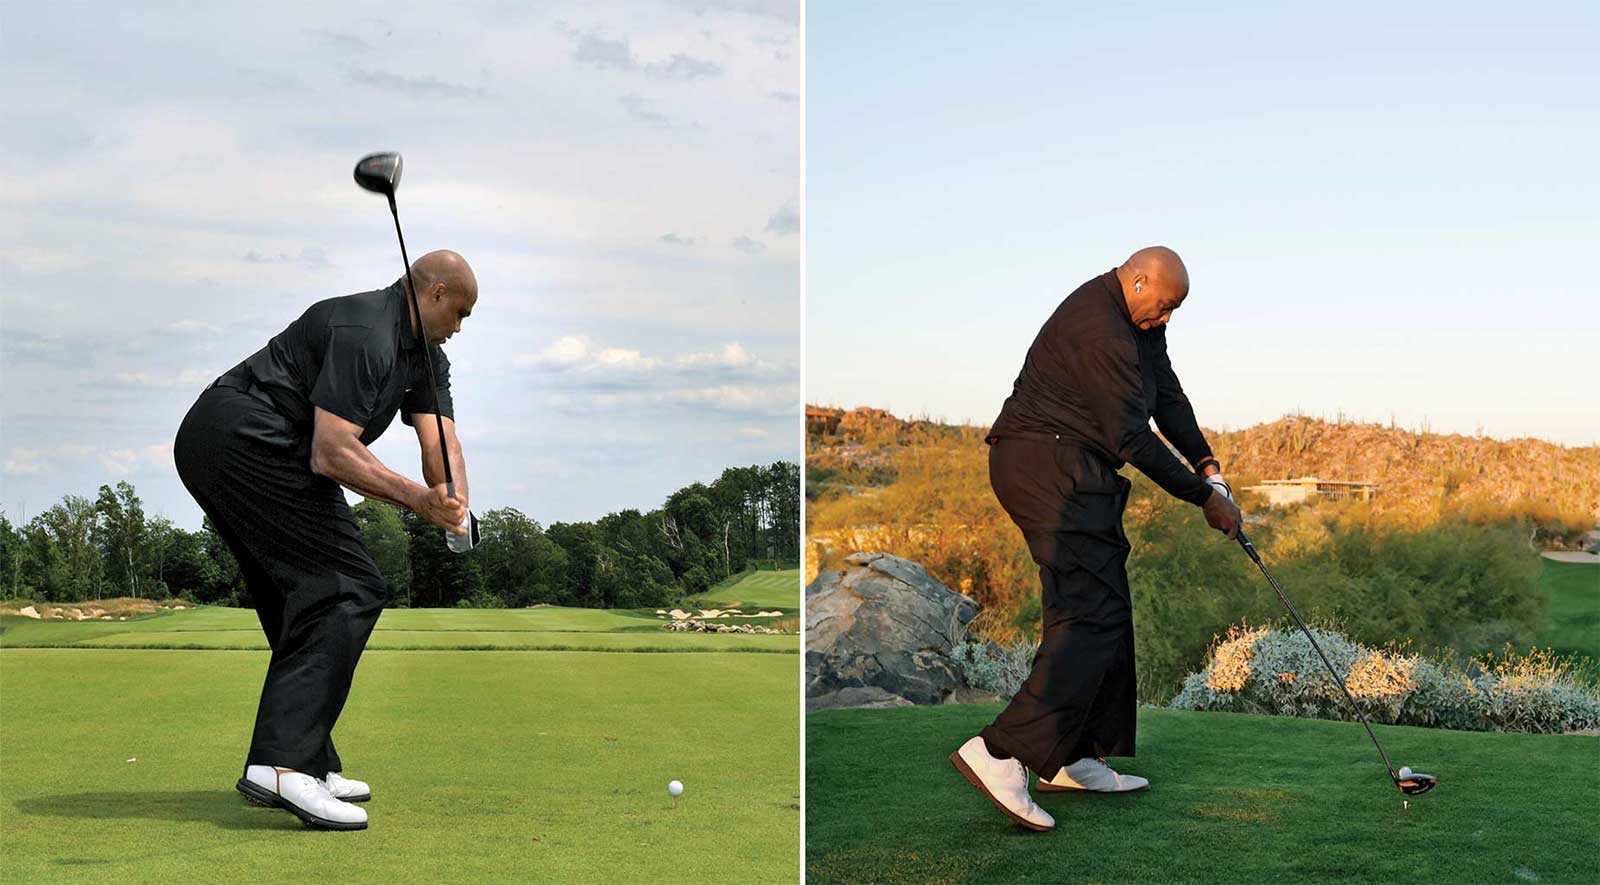 Charles Barkley working on his golf swing